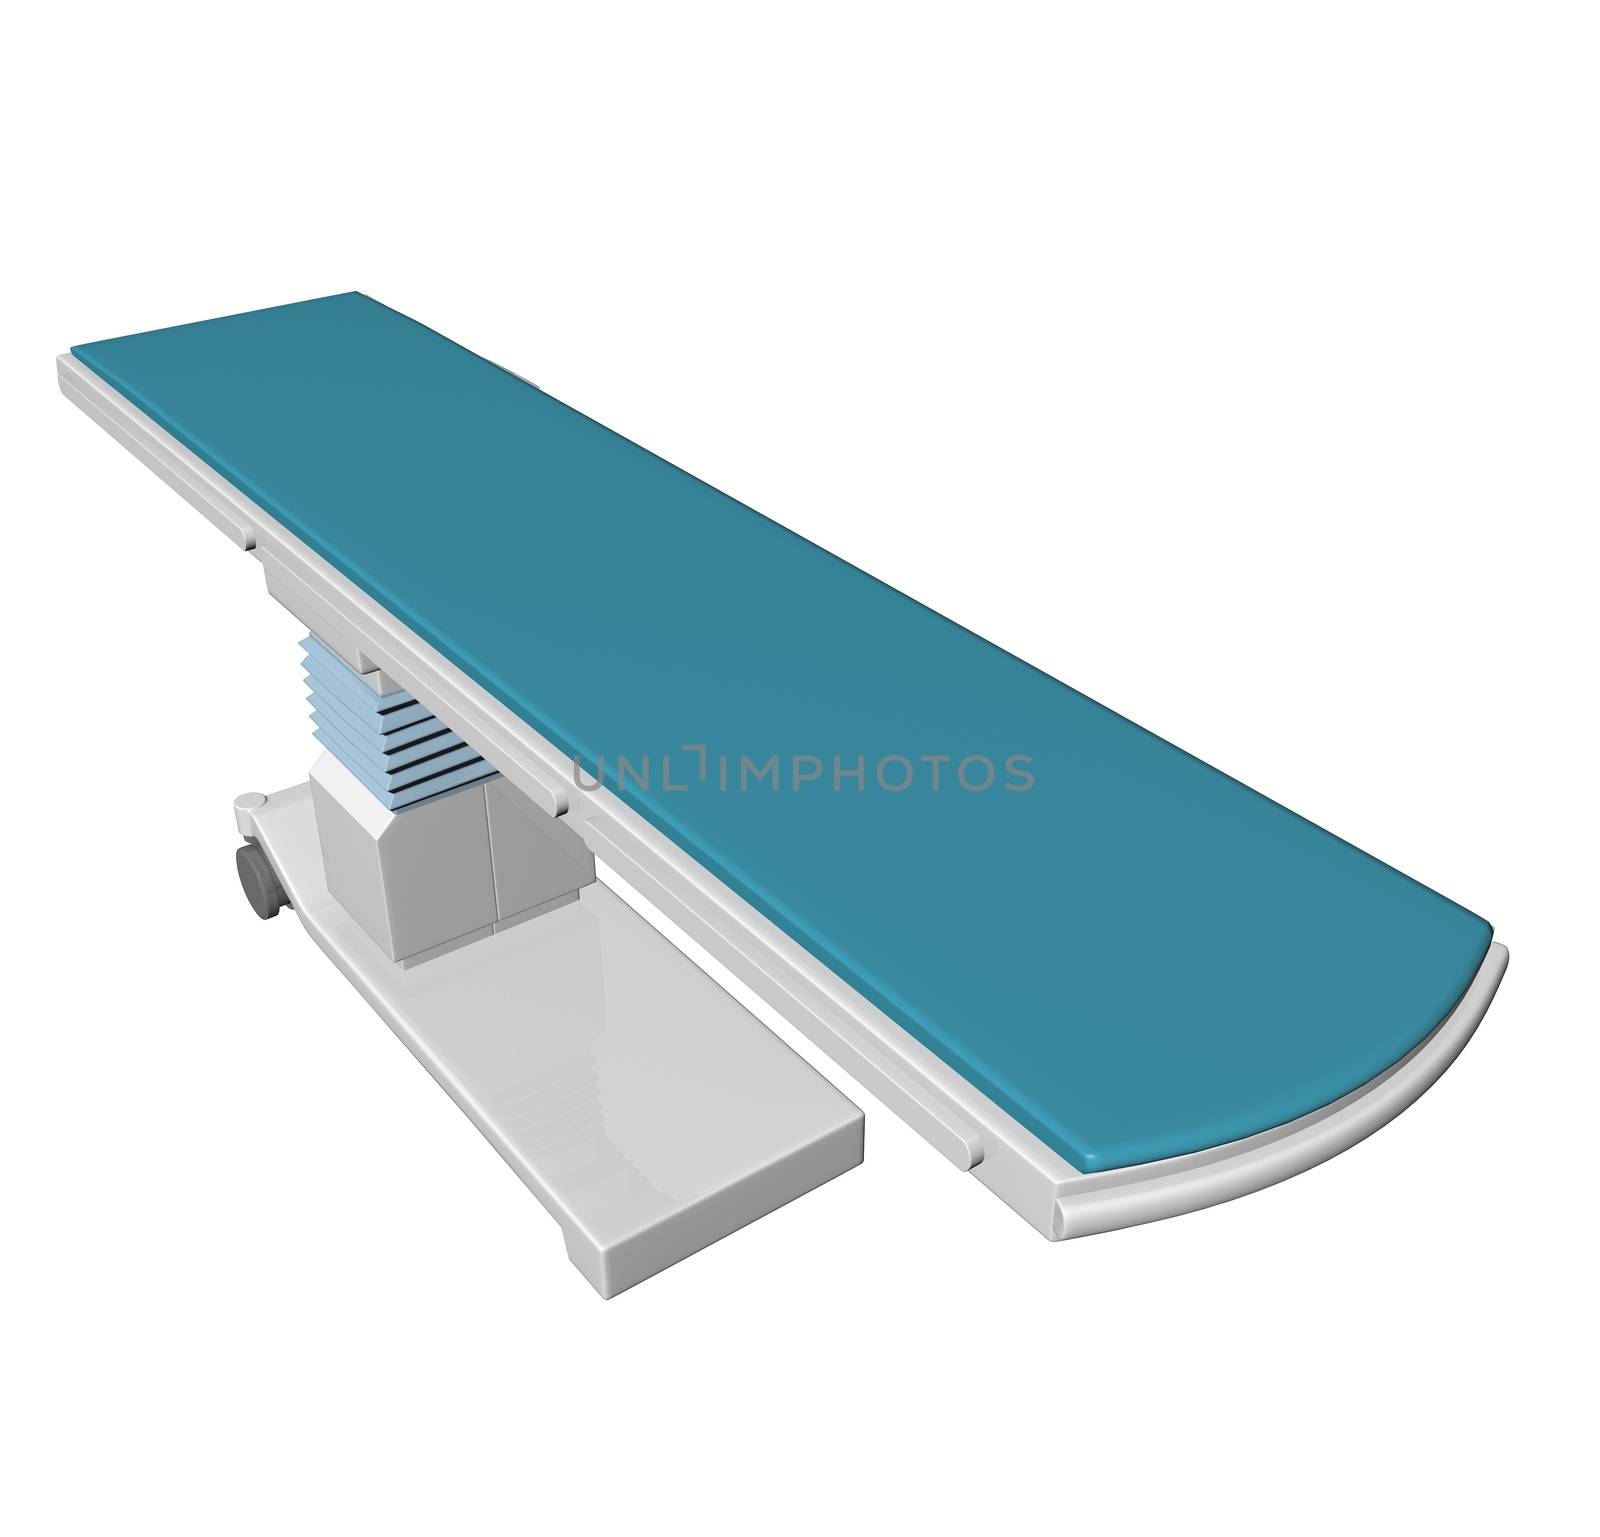 Adjustable height medical examination table or bed with blue pad by Morphart